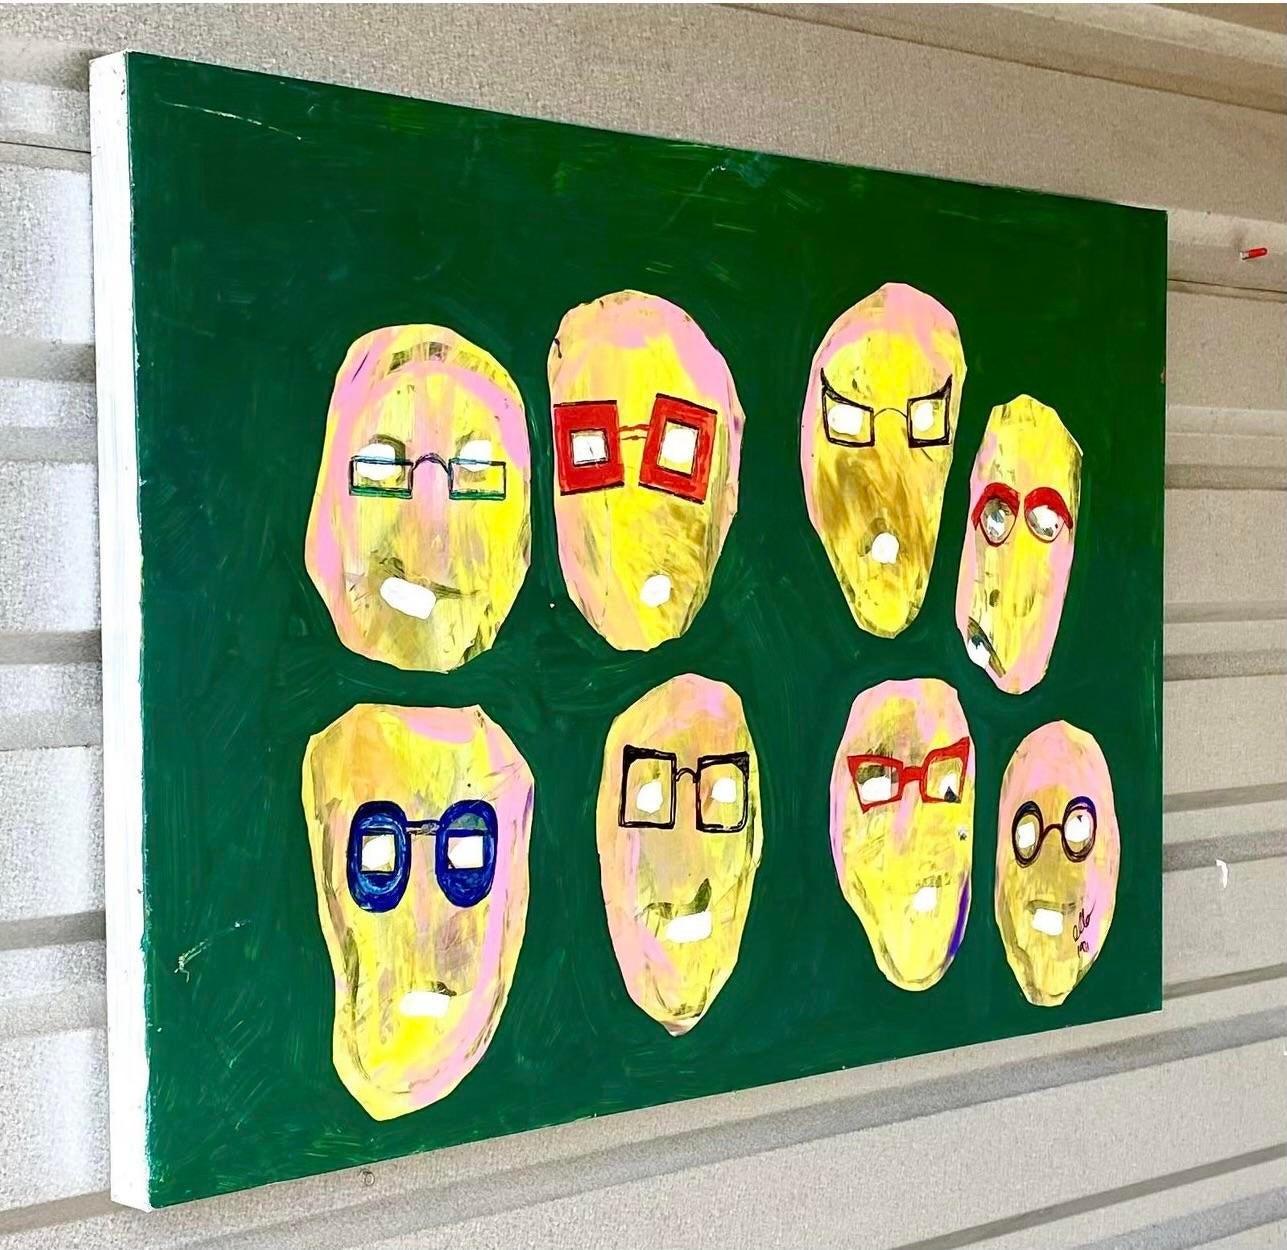 Fantastic oil painting of faces with spectacles. Signed by the artist and dated 1971.